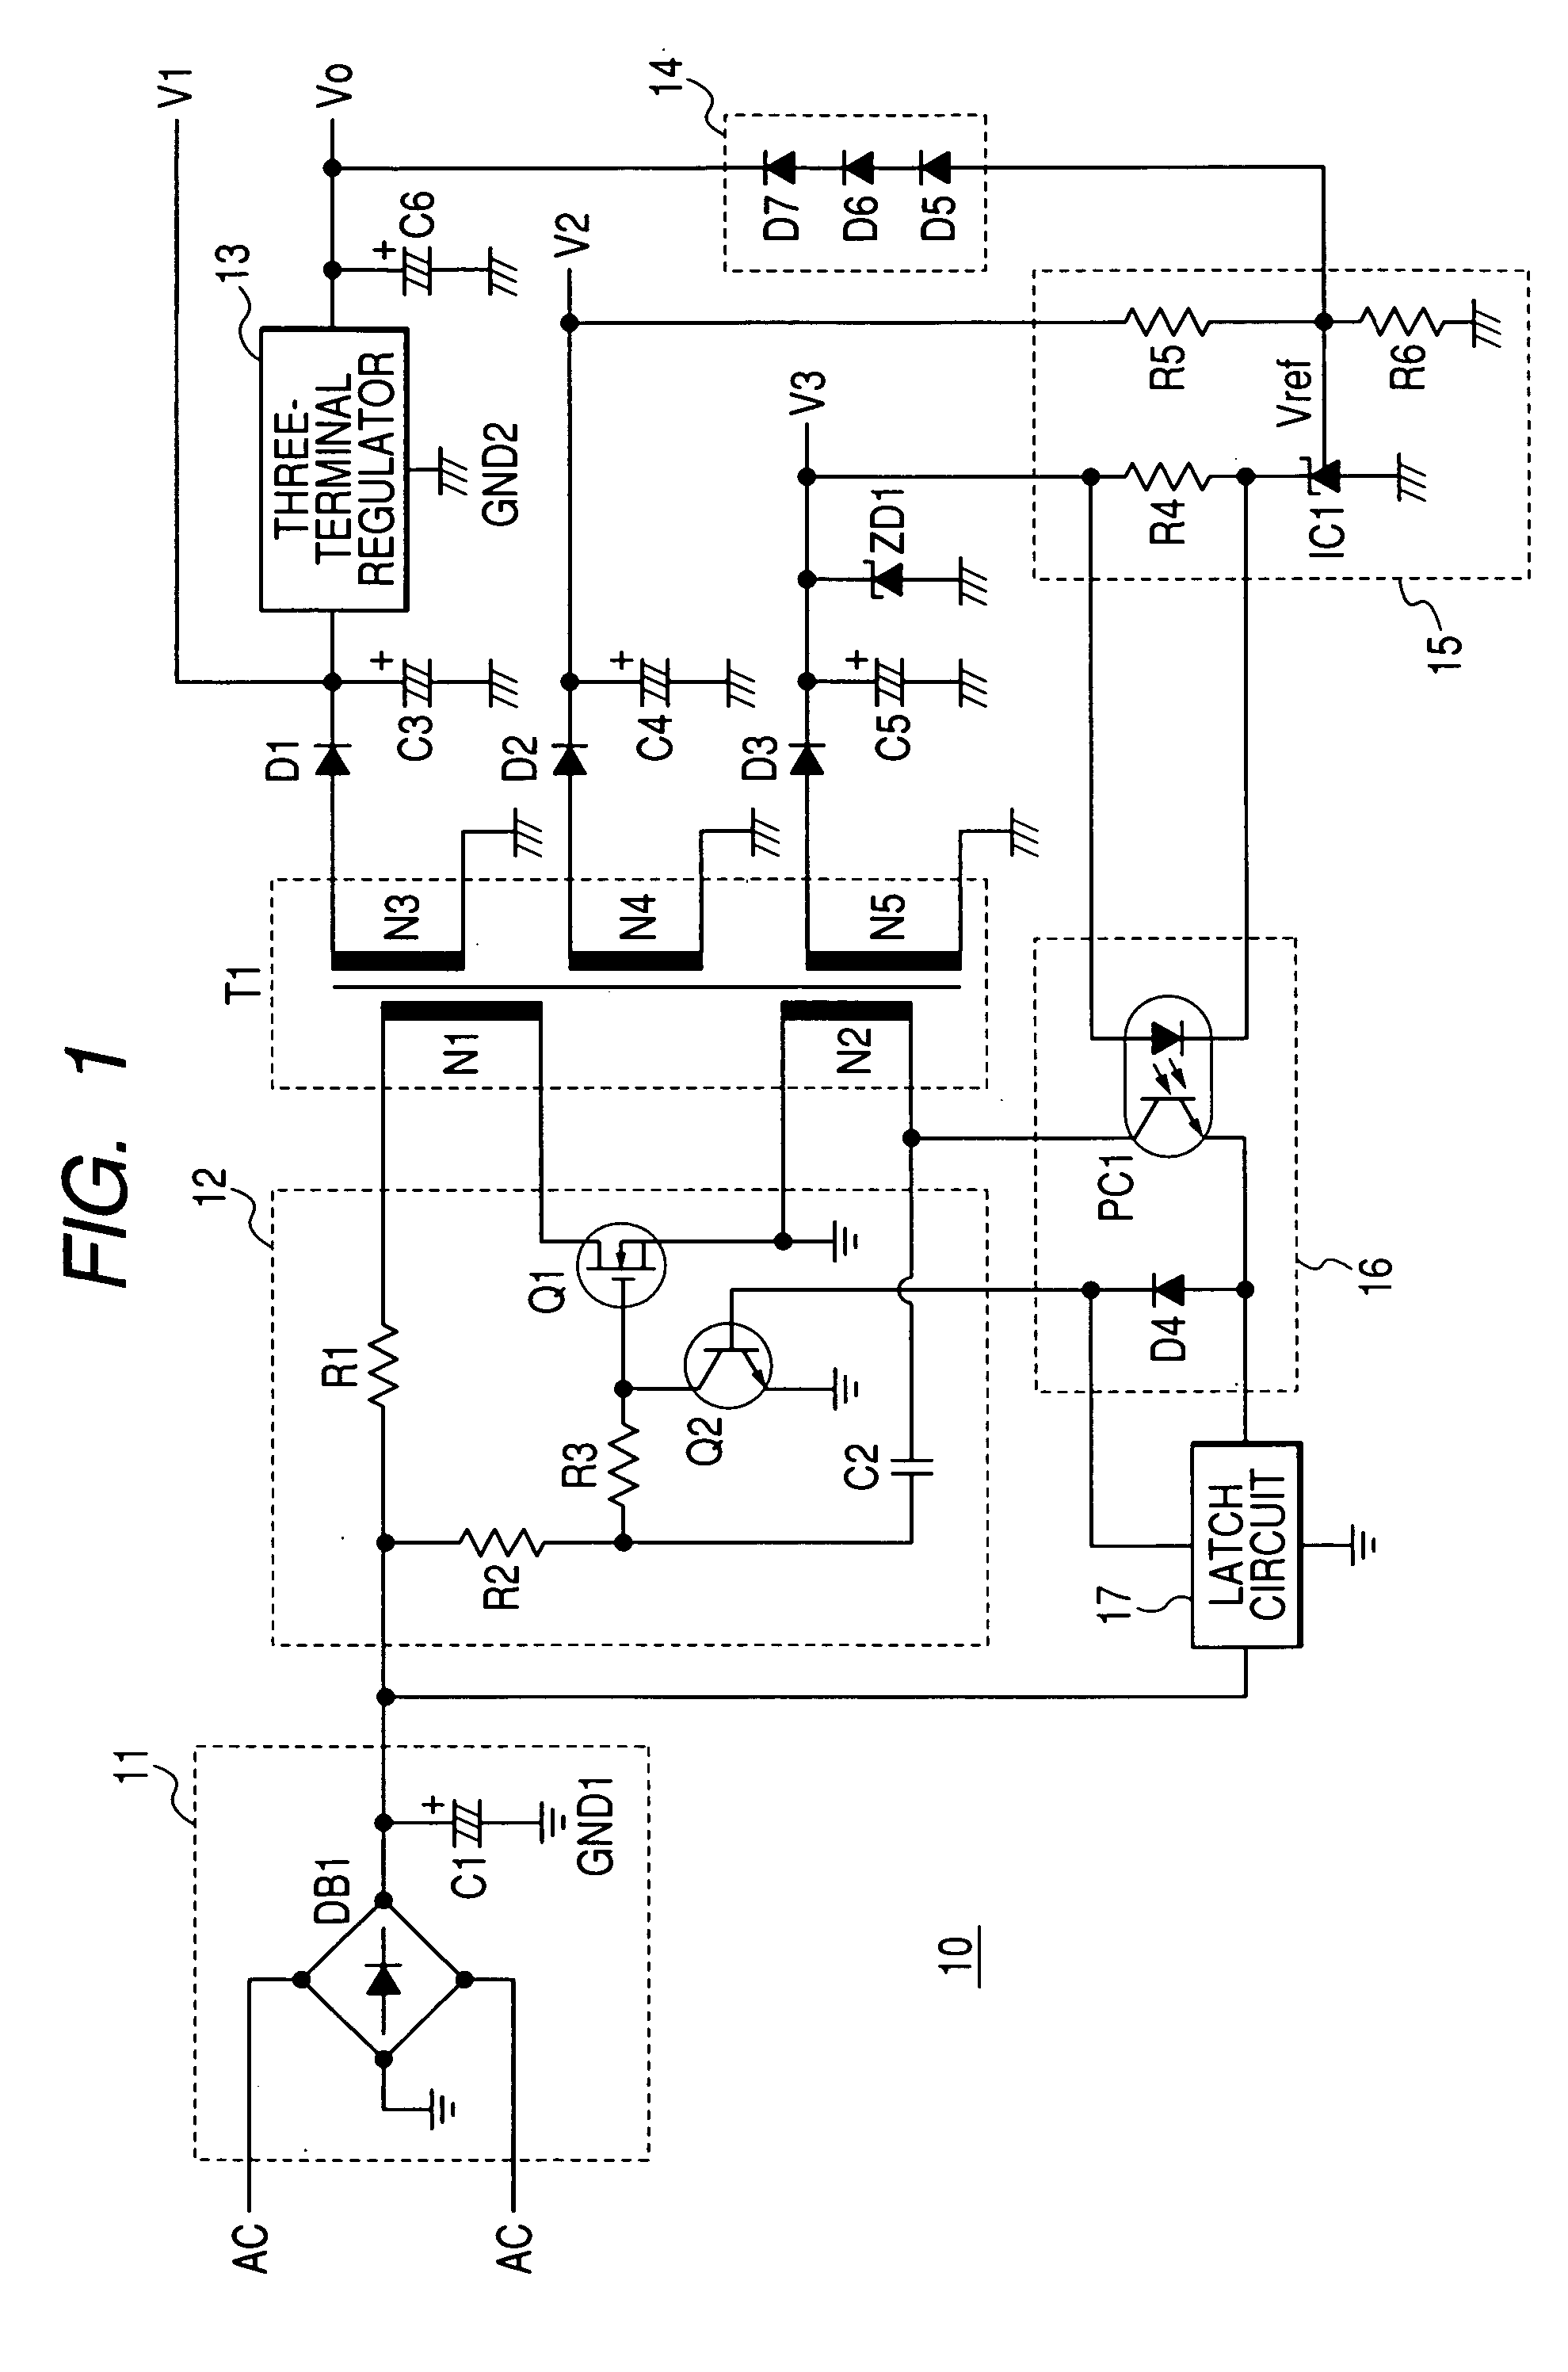 Switching power device